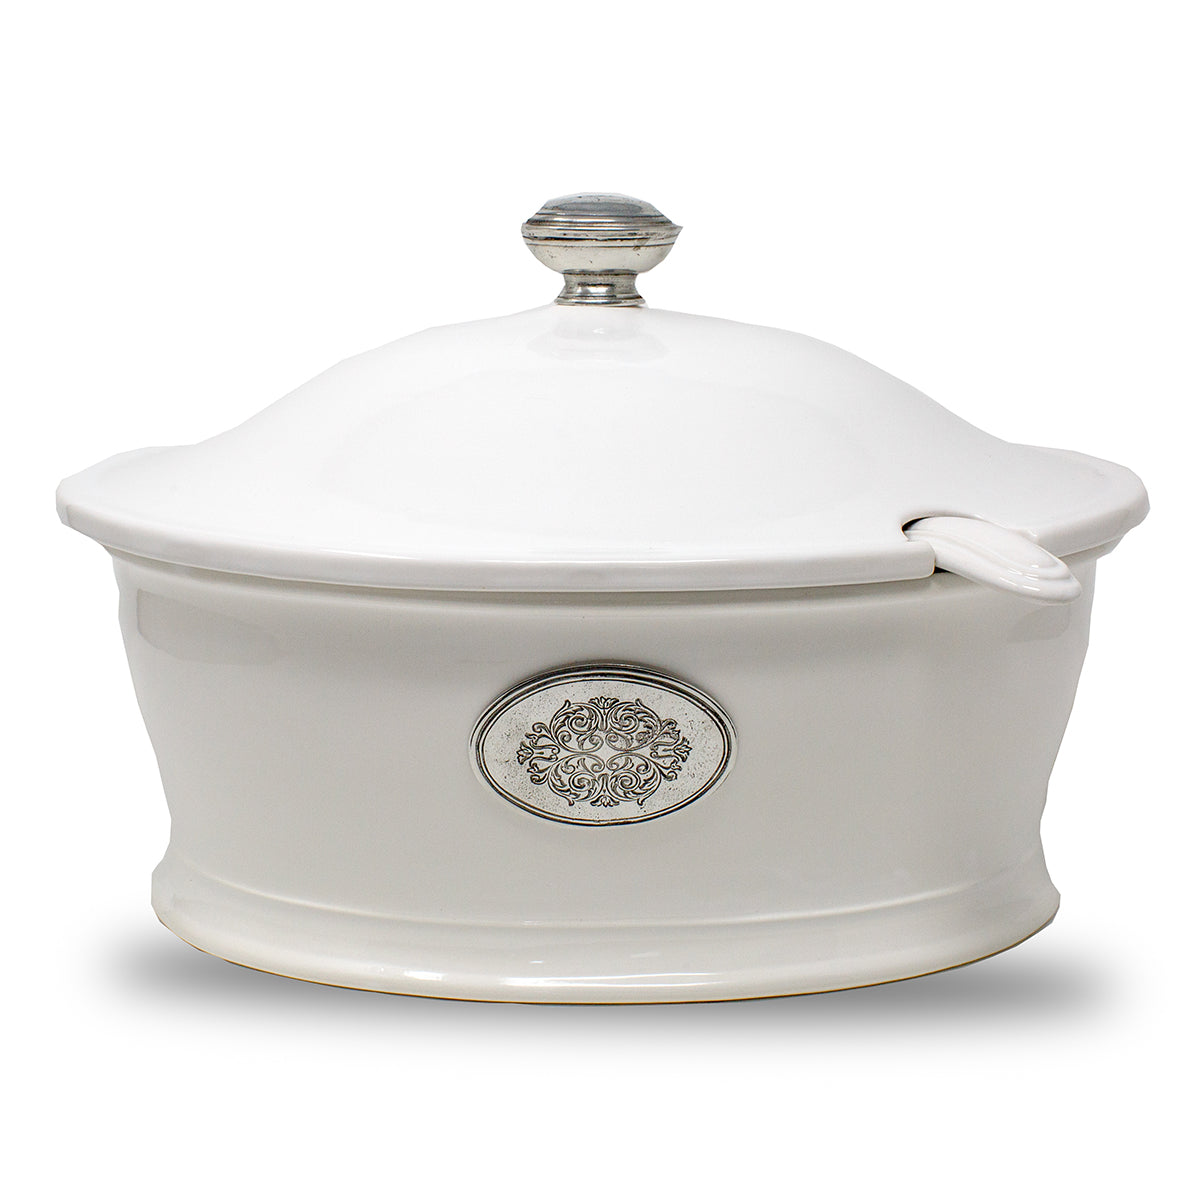 Tuscan Large Oval Tureen with Ladle